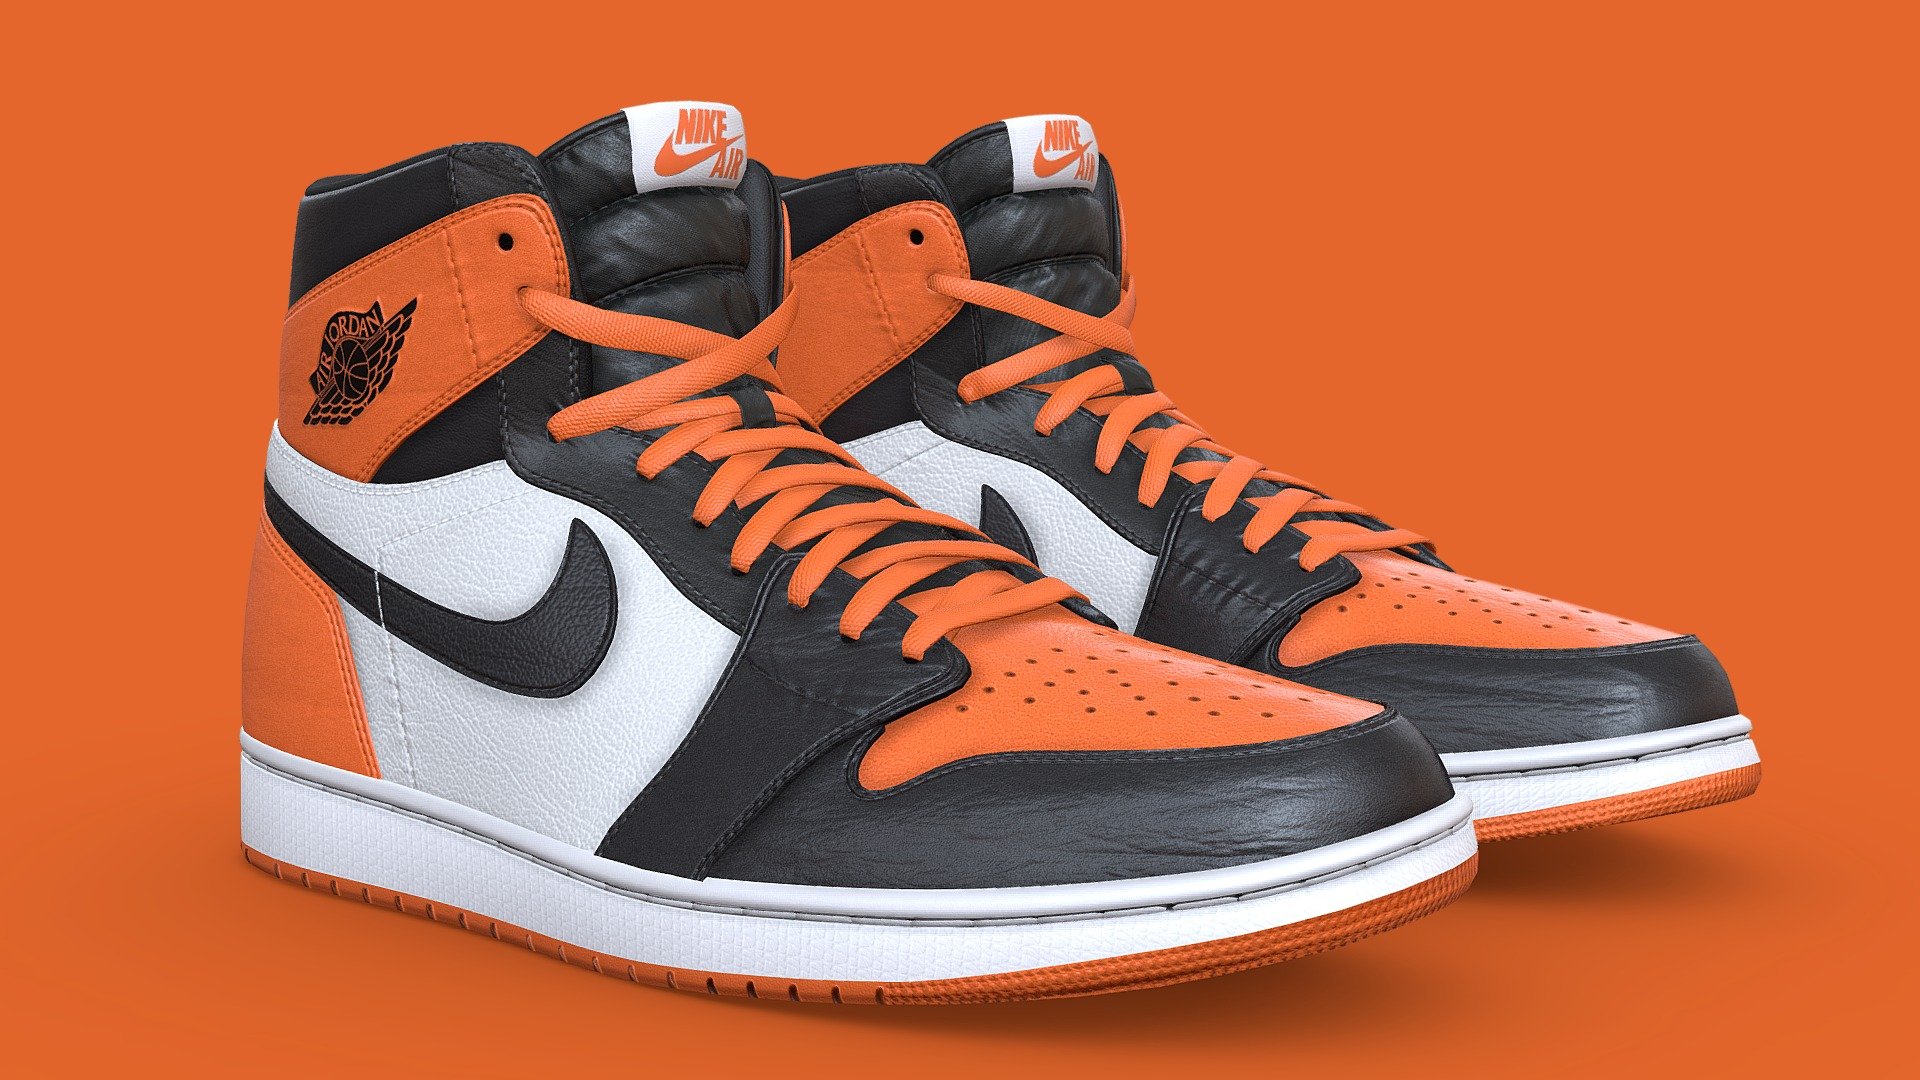 Game Ready, optimized version of my Jordan 1 shoe

This Low Poly version is included in the full version available here:
https://sketchfab.com/3d-models/jordan-1-retro-high-og-shattered-backboard-583fb148cd184d32a8044158001b7e77

This version features an optimized mesh. High Poly detail on the sole has been replaced with a baked normal map and the rest of the model has been streamlined to reduce the polycount 3d model